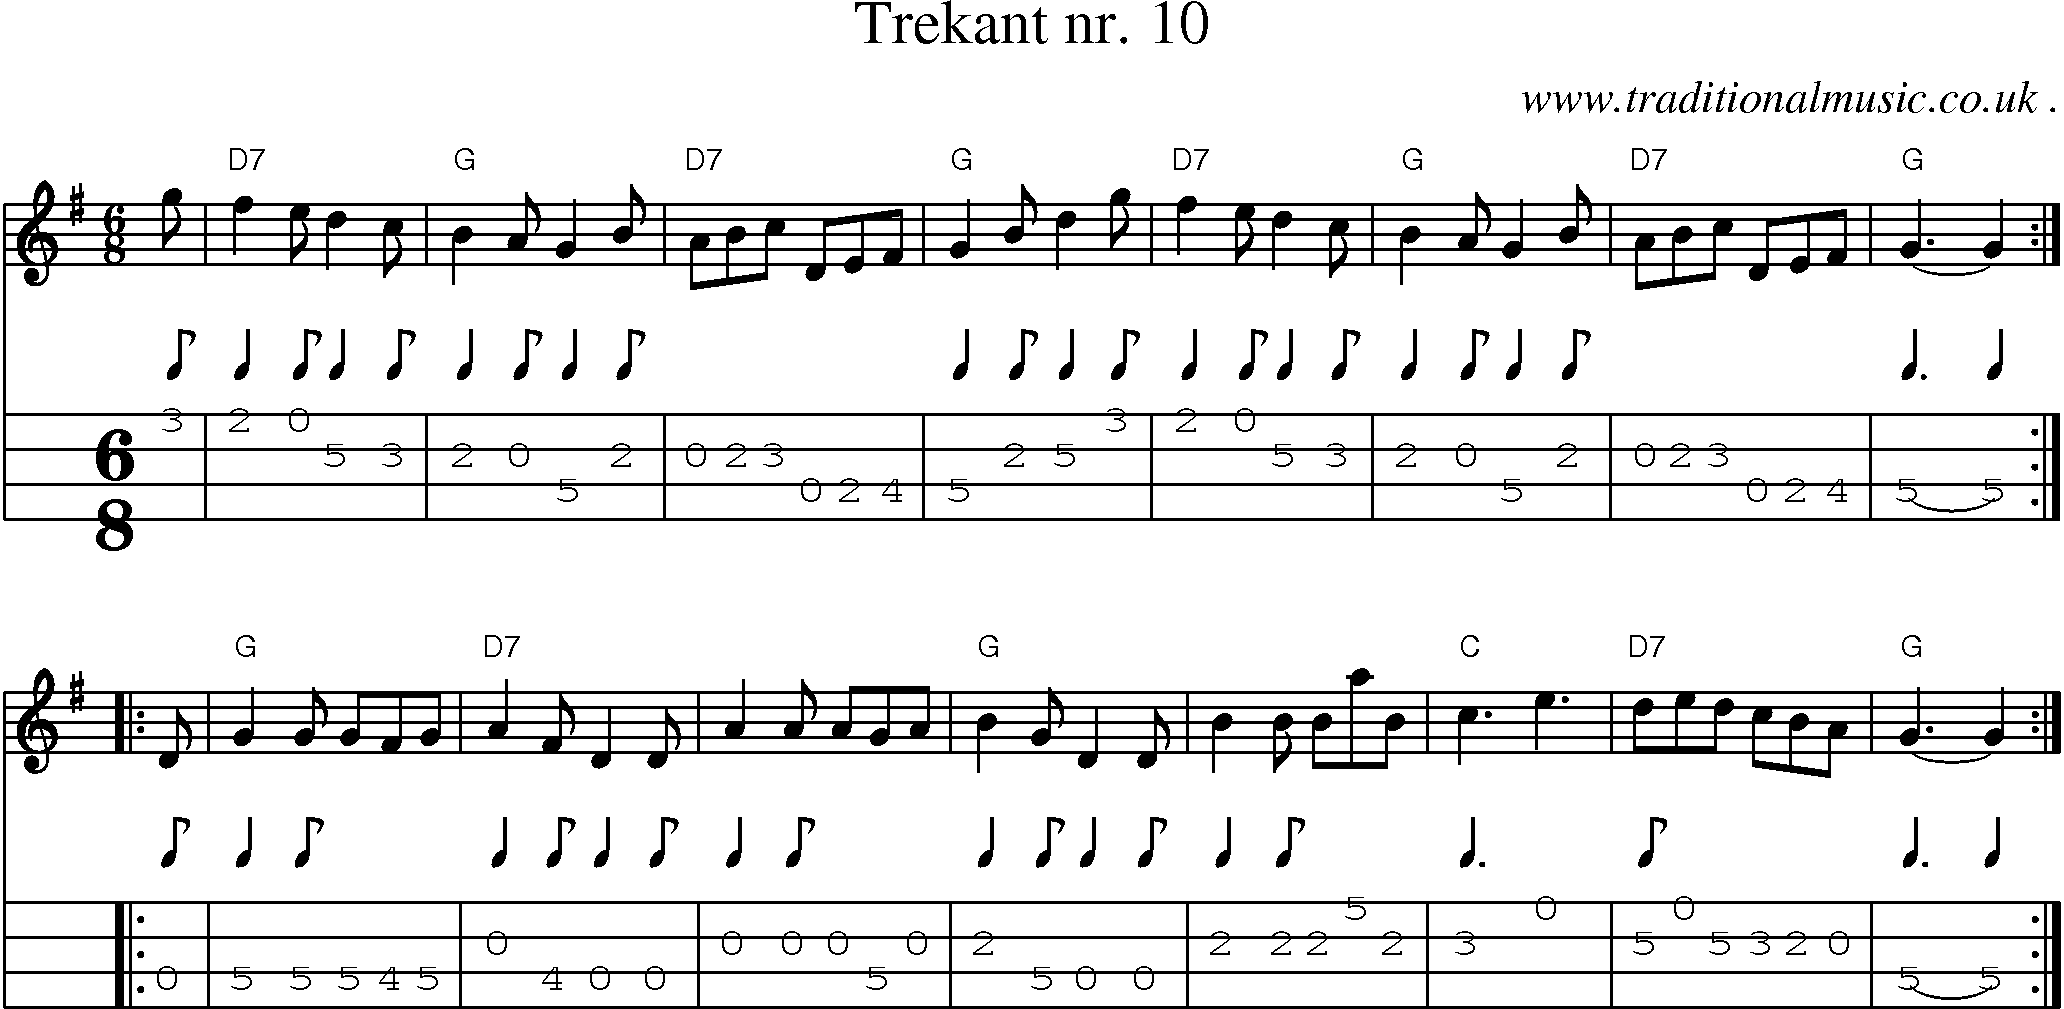 Sheet-music  score, Chords and Mandolin Tabs for Trekant Nr 10